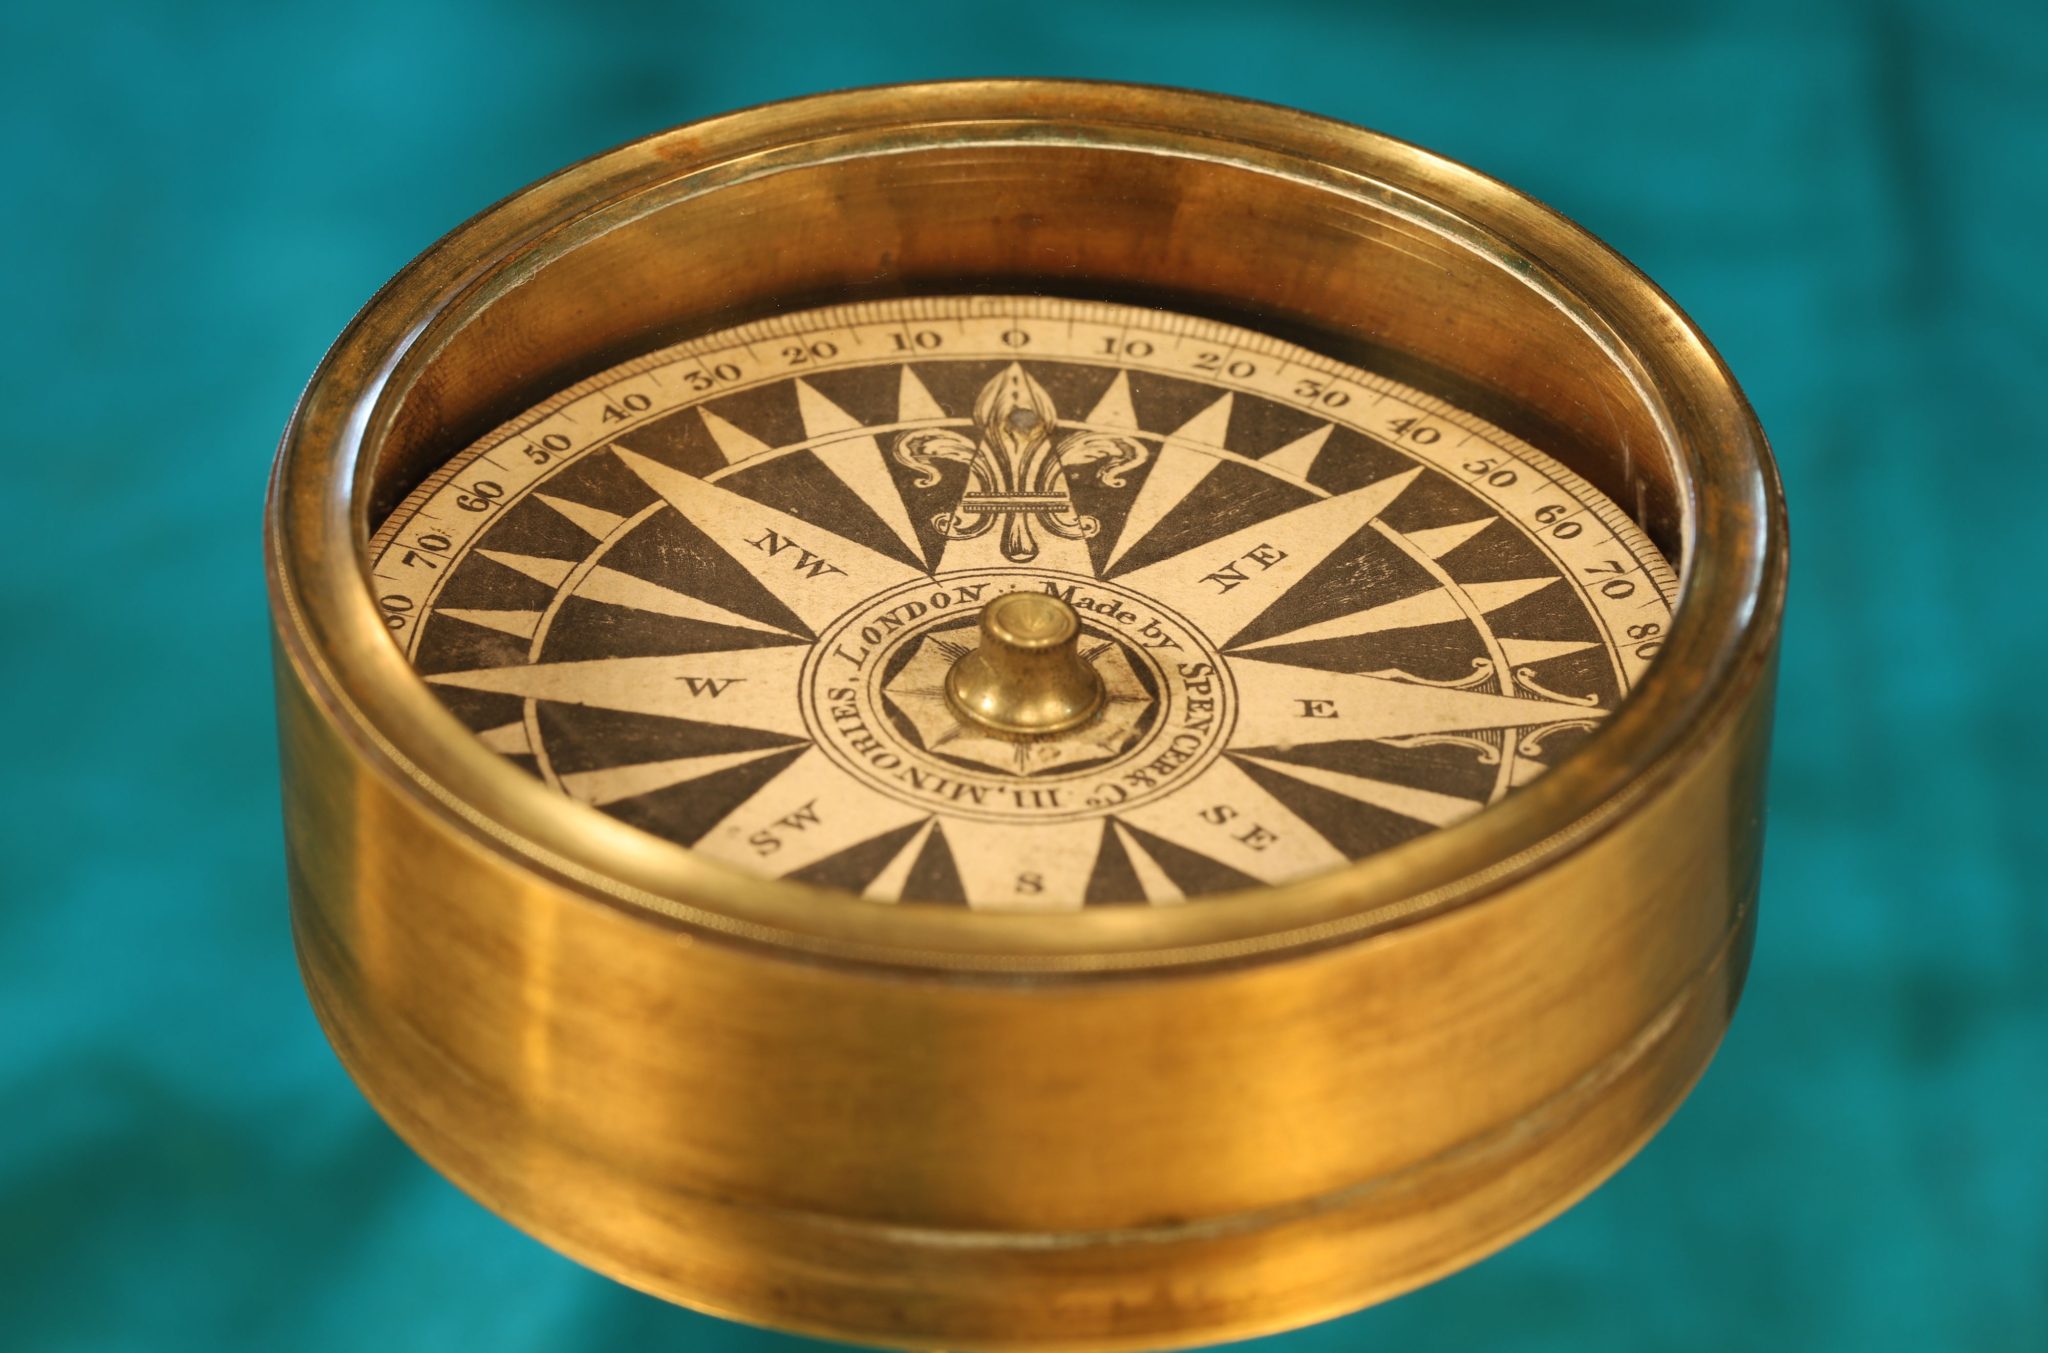 Image of Mariners or Explorers Compass by Spencer Browning & Co